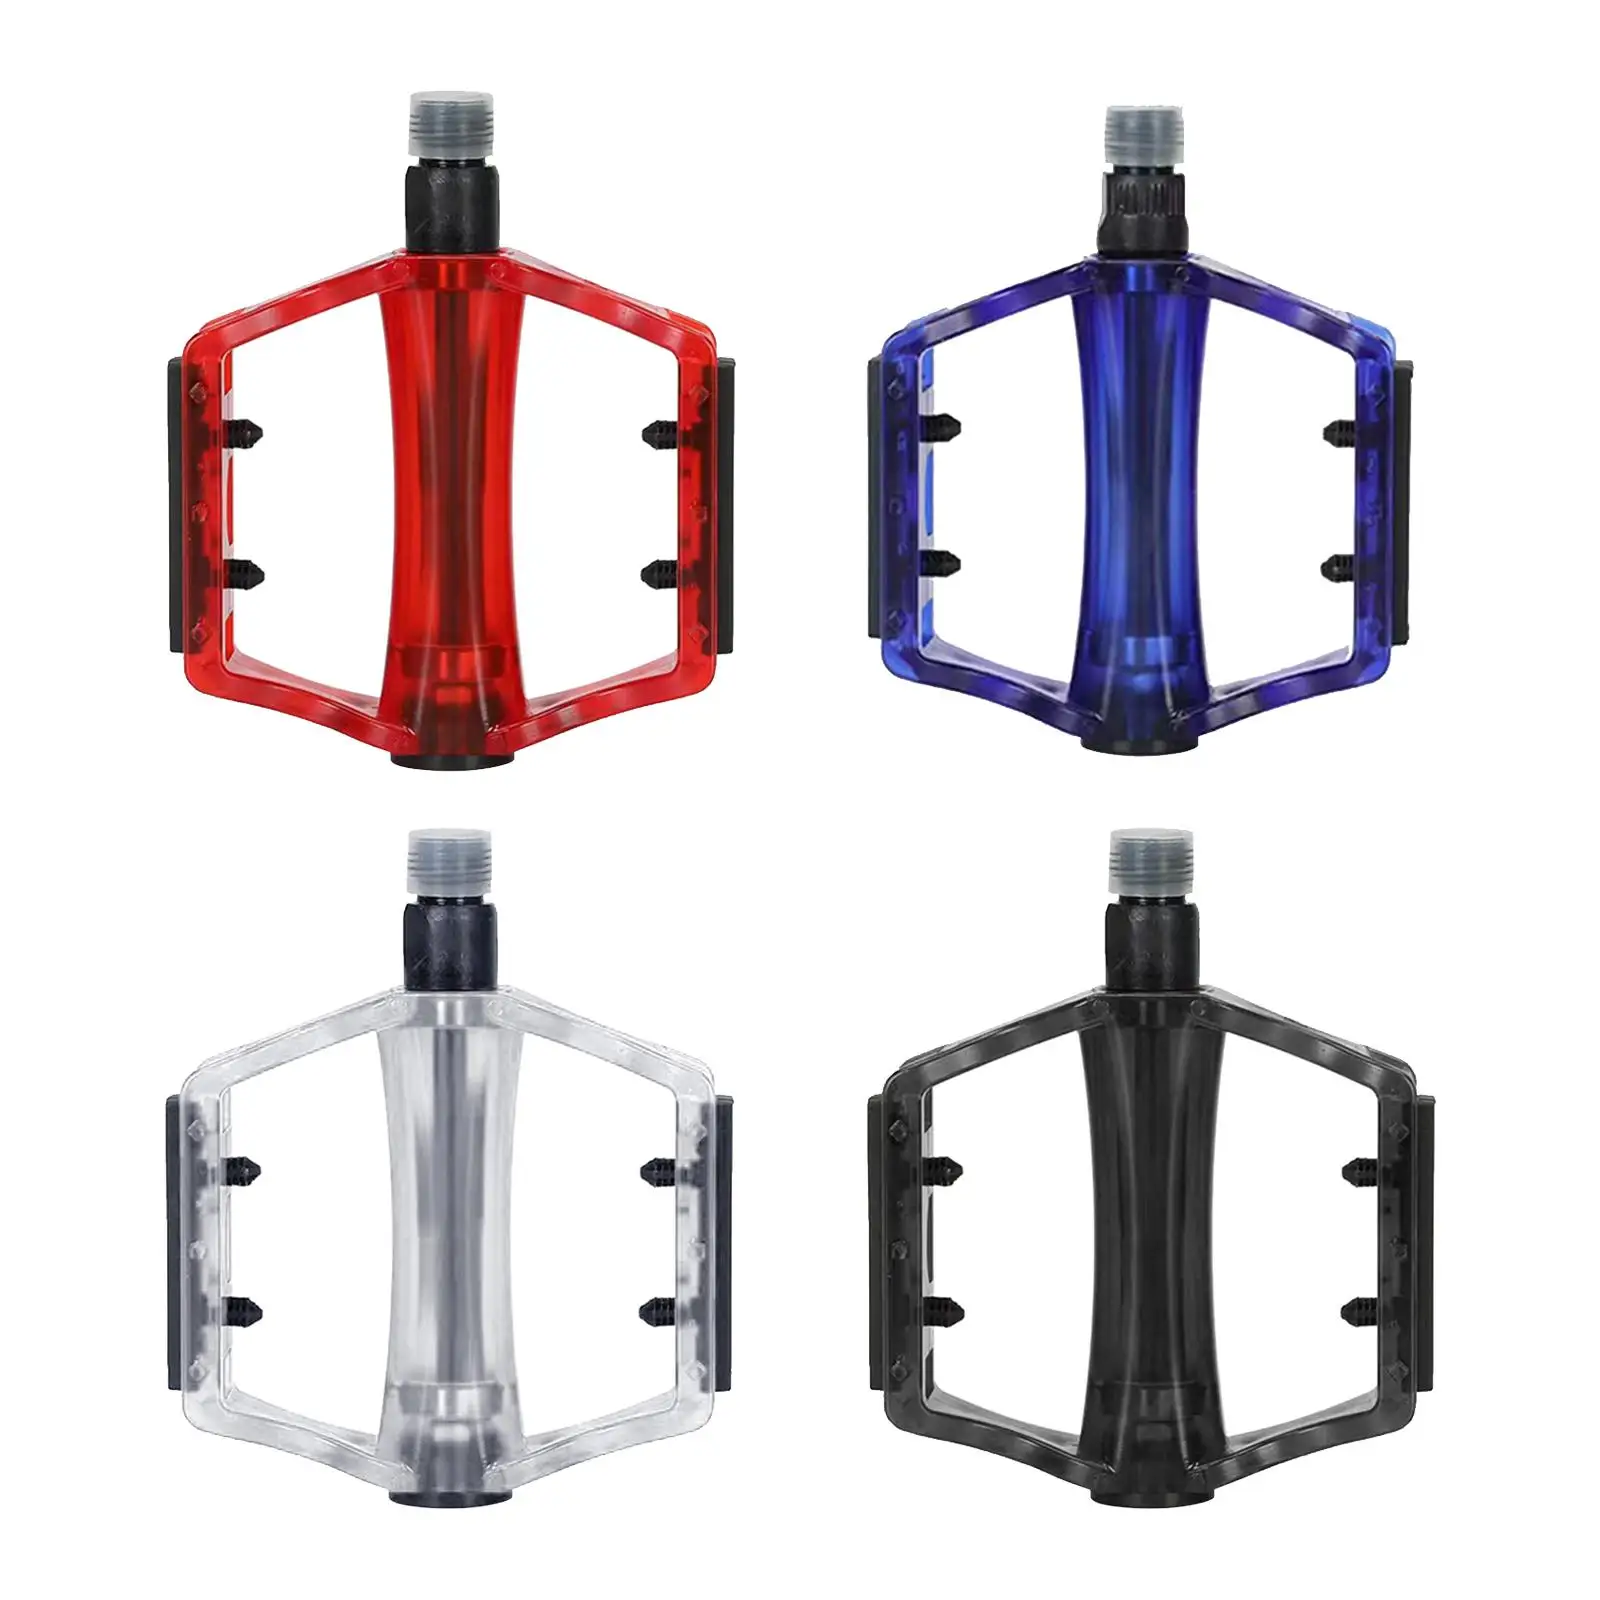 2x Bike Pedals Bicycle Pedals Universal Durable Lightweight Accessories for Road Bike Mountain Bike Adult Bikes Supplies